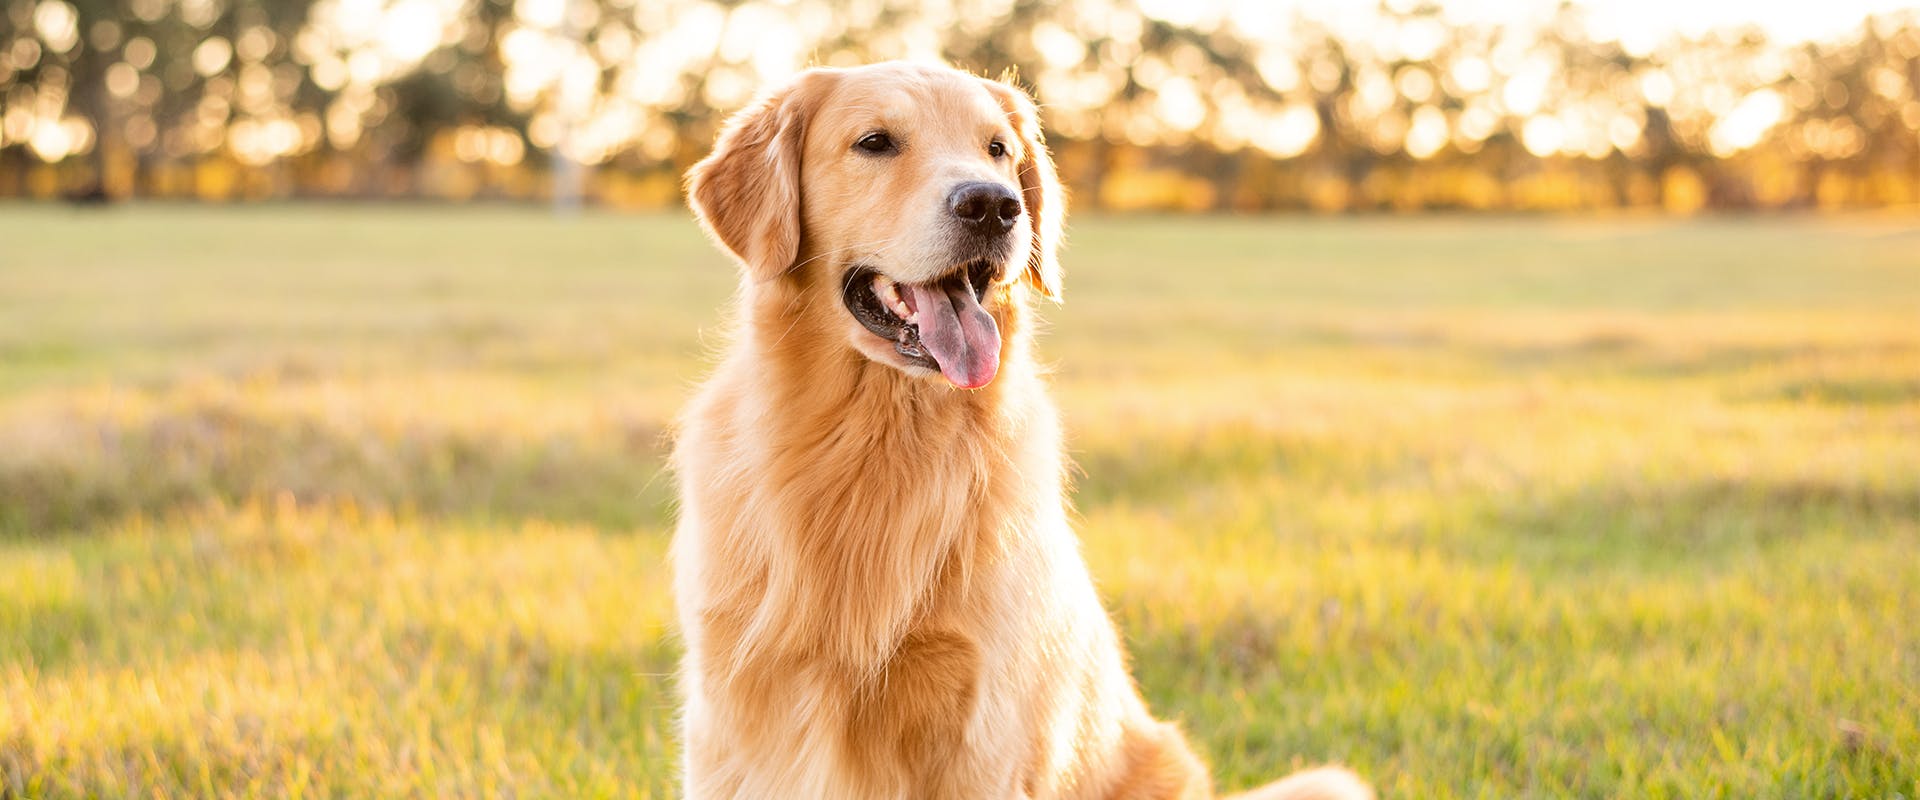 A Golden Retriever standing in the middle of a grassy park